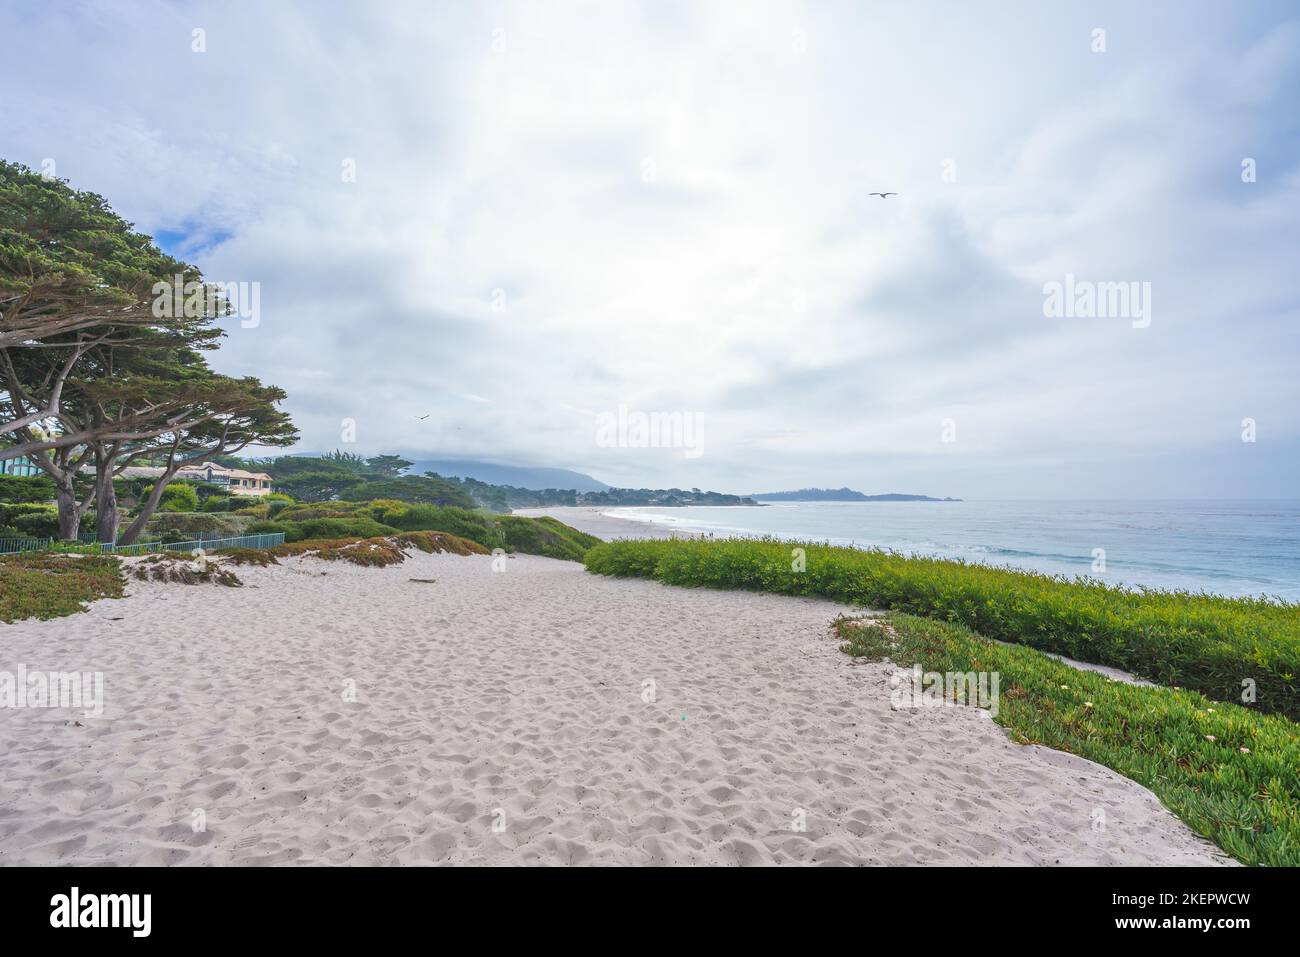 Carmel beach,  a long, wide, white sand beach. Carmel Beach is one of the most iconic spots on California's Central Coast Stock Photo